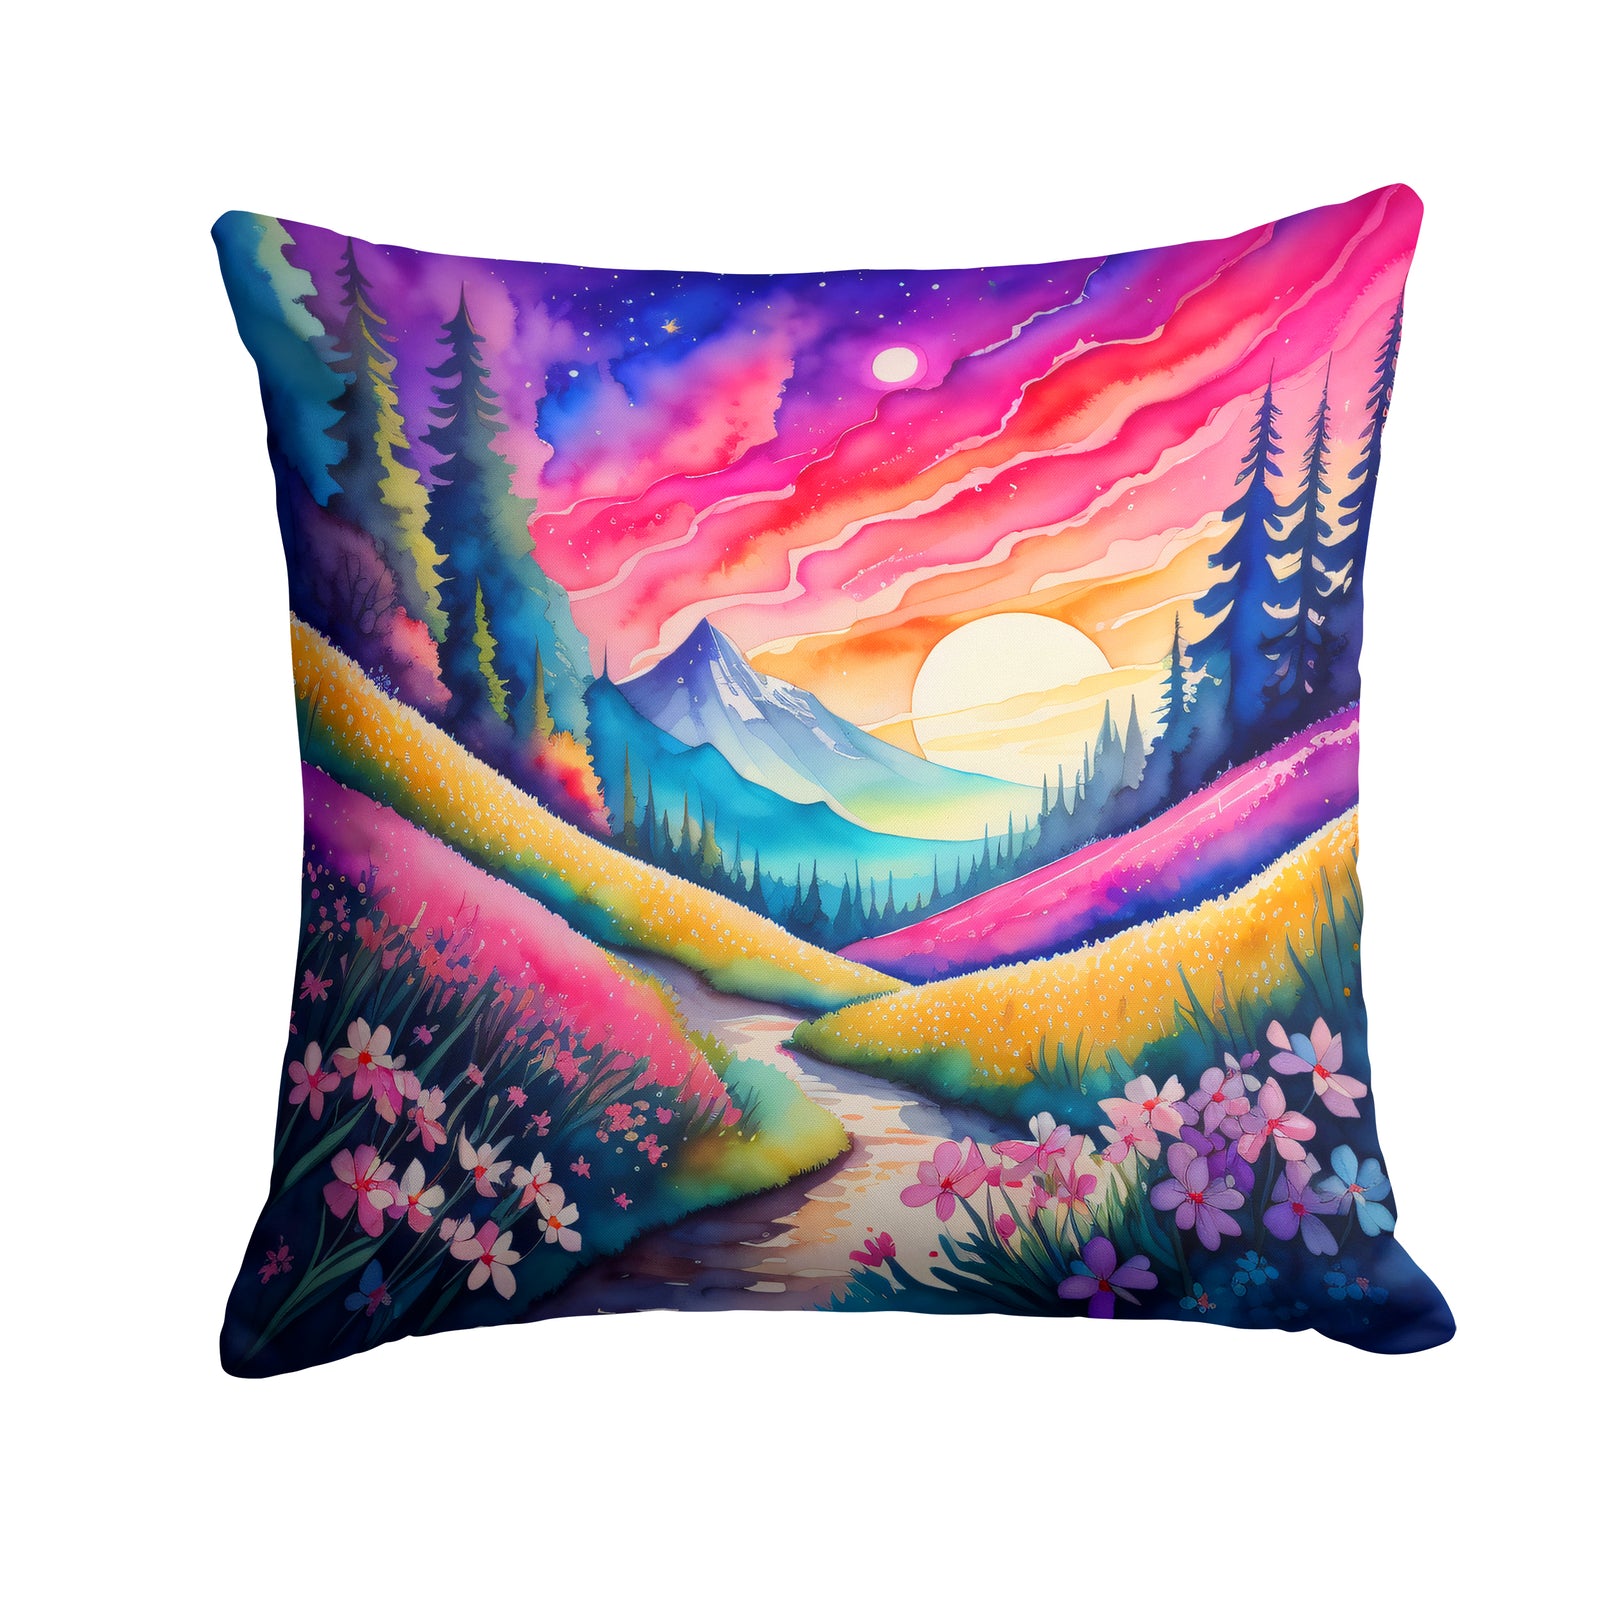 Buy this Colorful Phlox Fabric Decorative Pillow